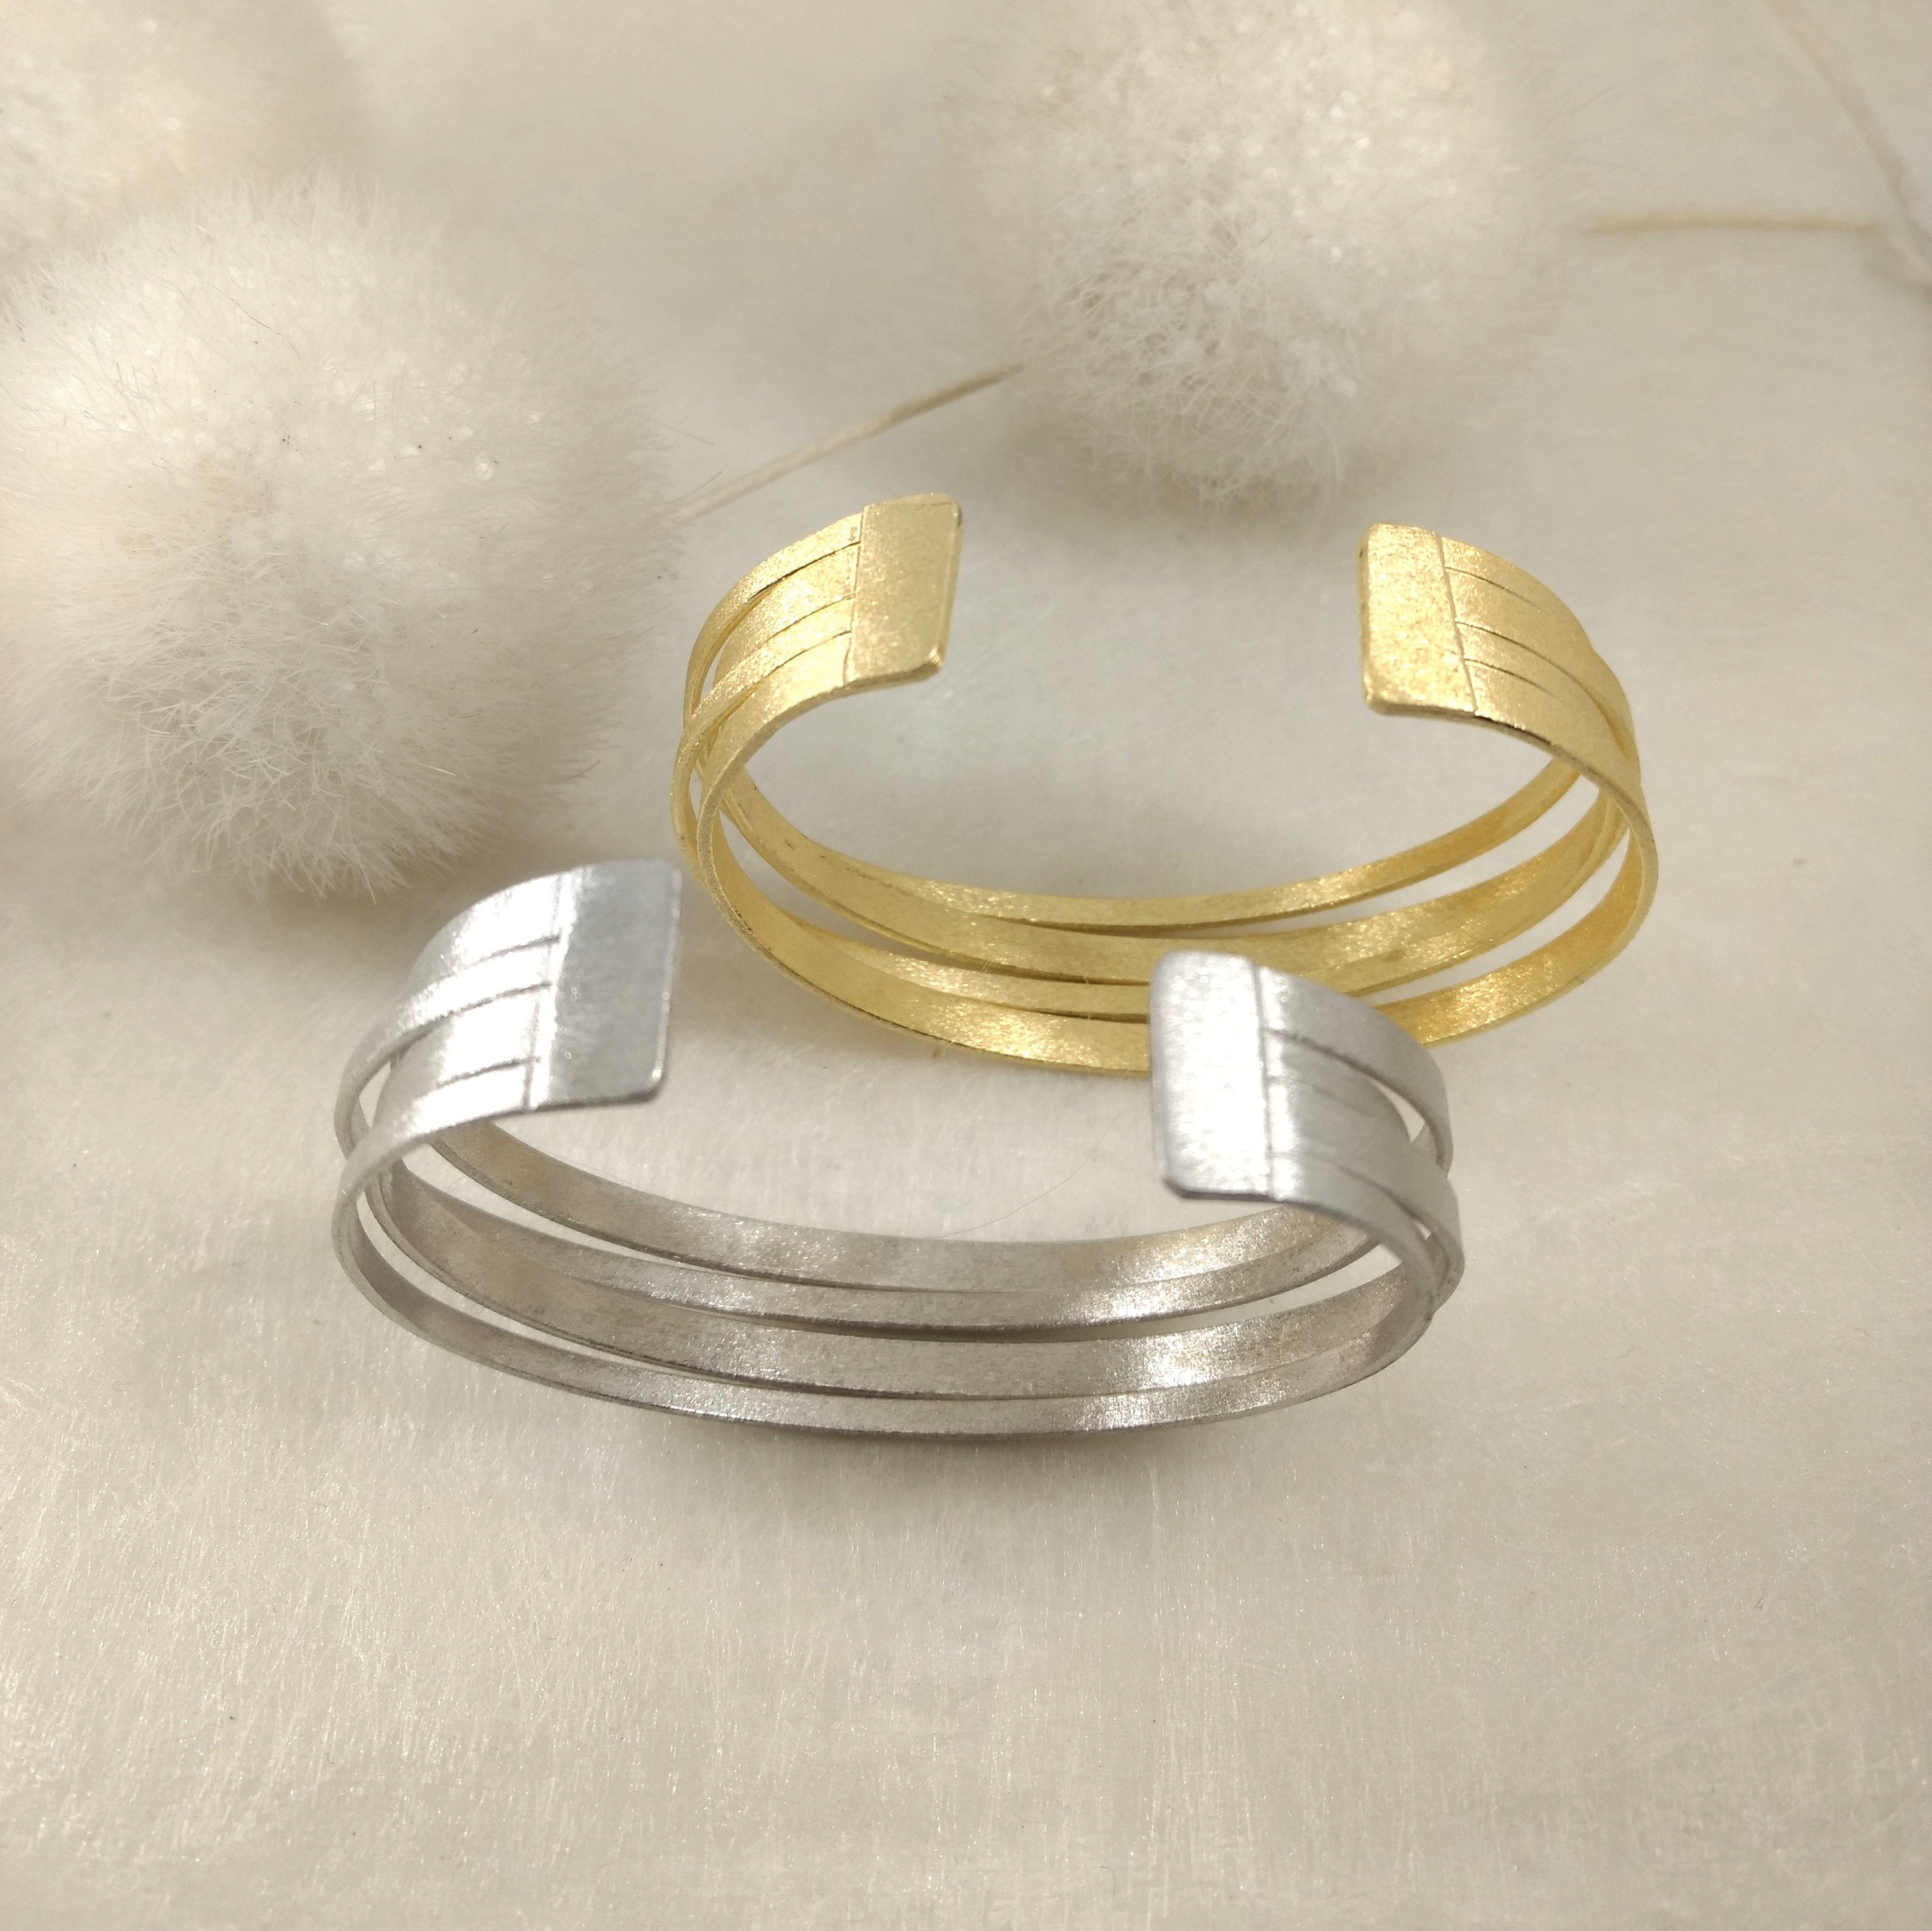 ImNos - Sterling Silver Bangle rhodium plated or with a 18 karat gold plating (P99)